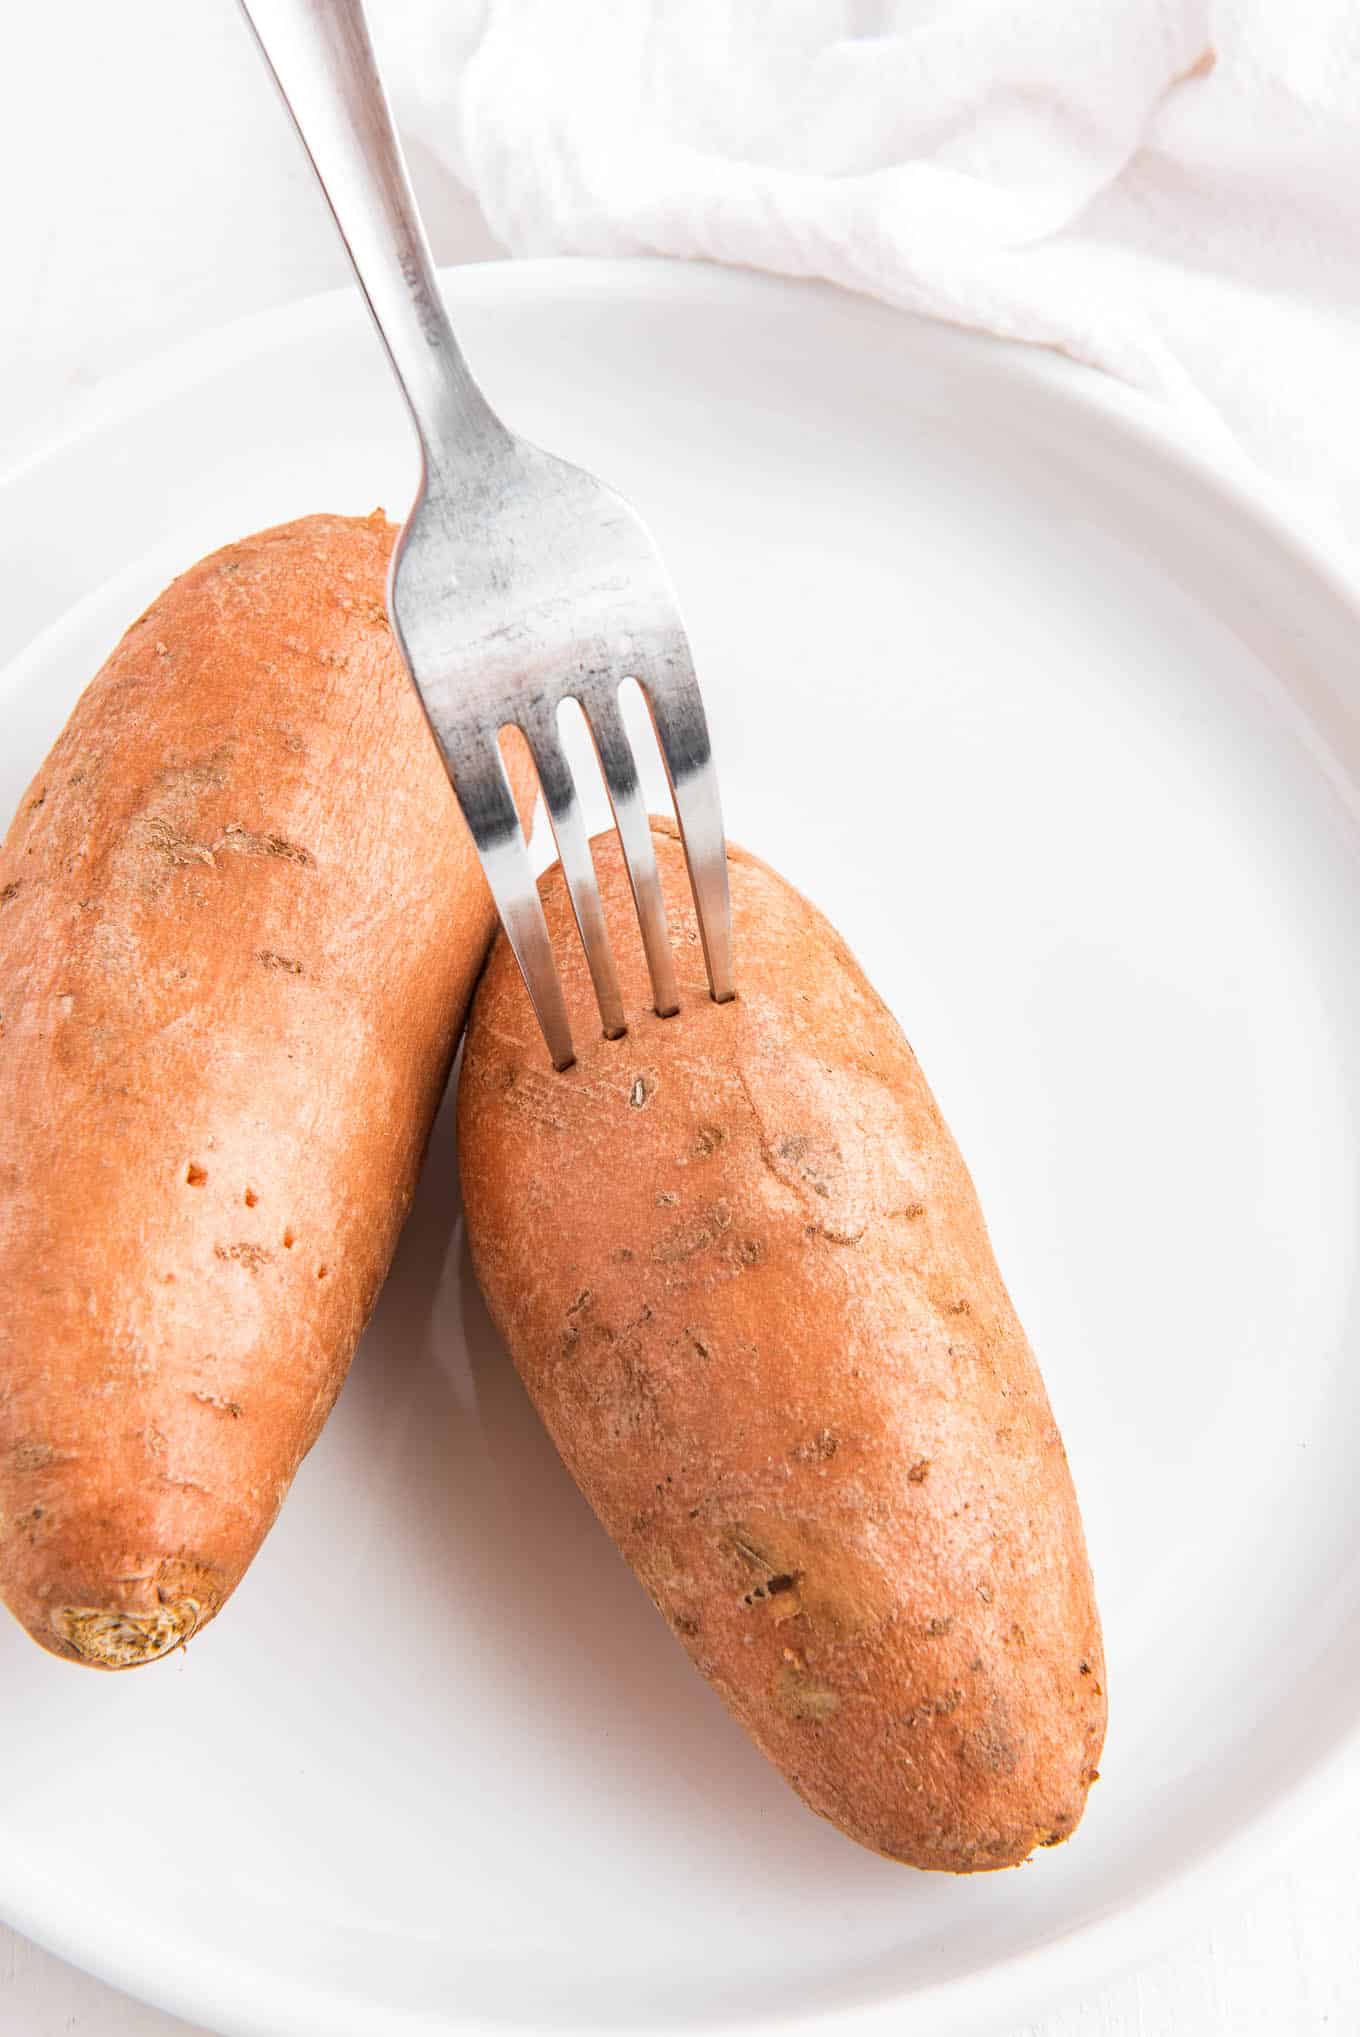 A fork piercing holes in the sweet potatoes on a plate.